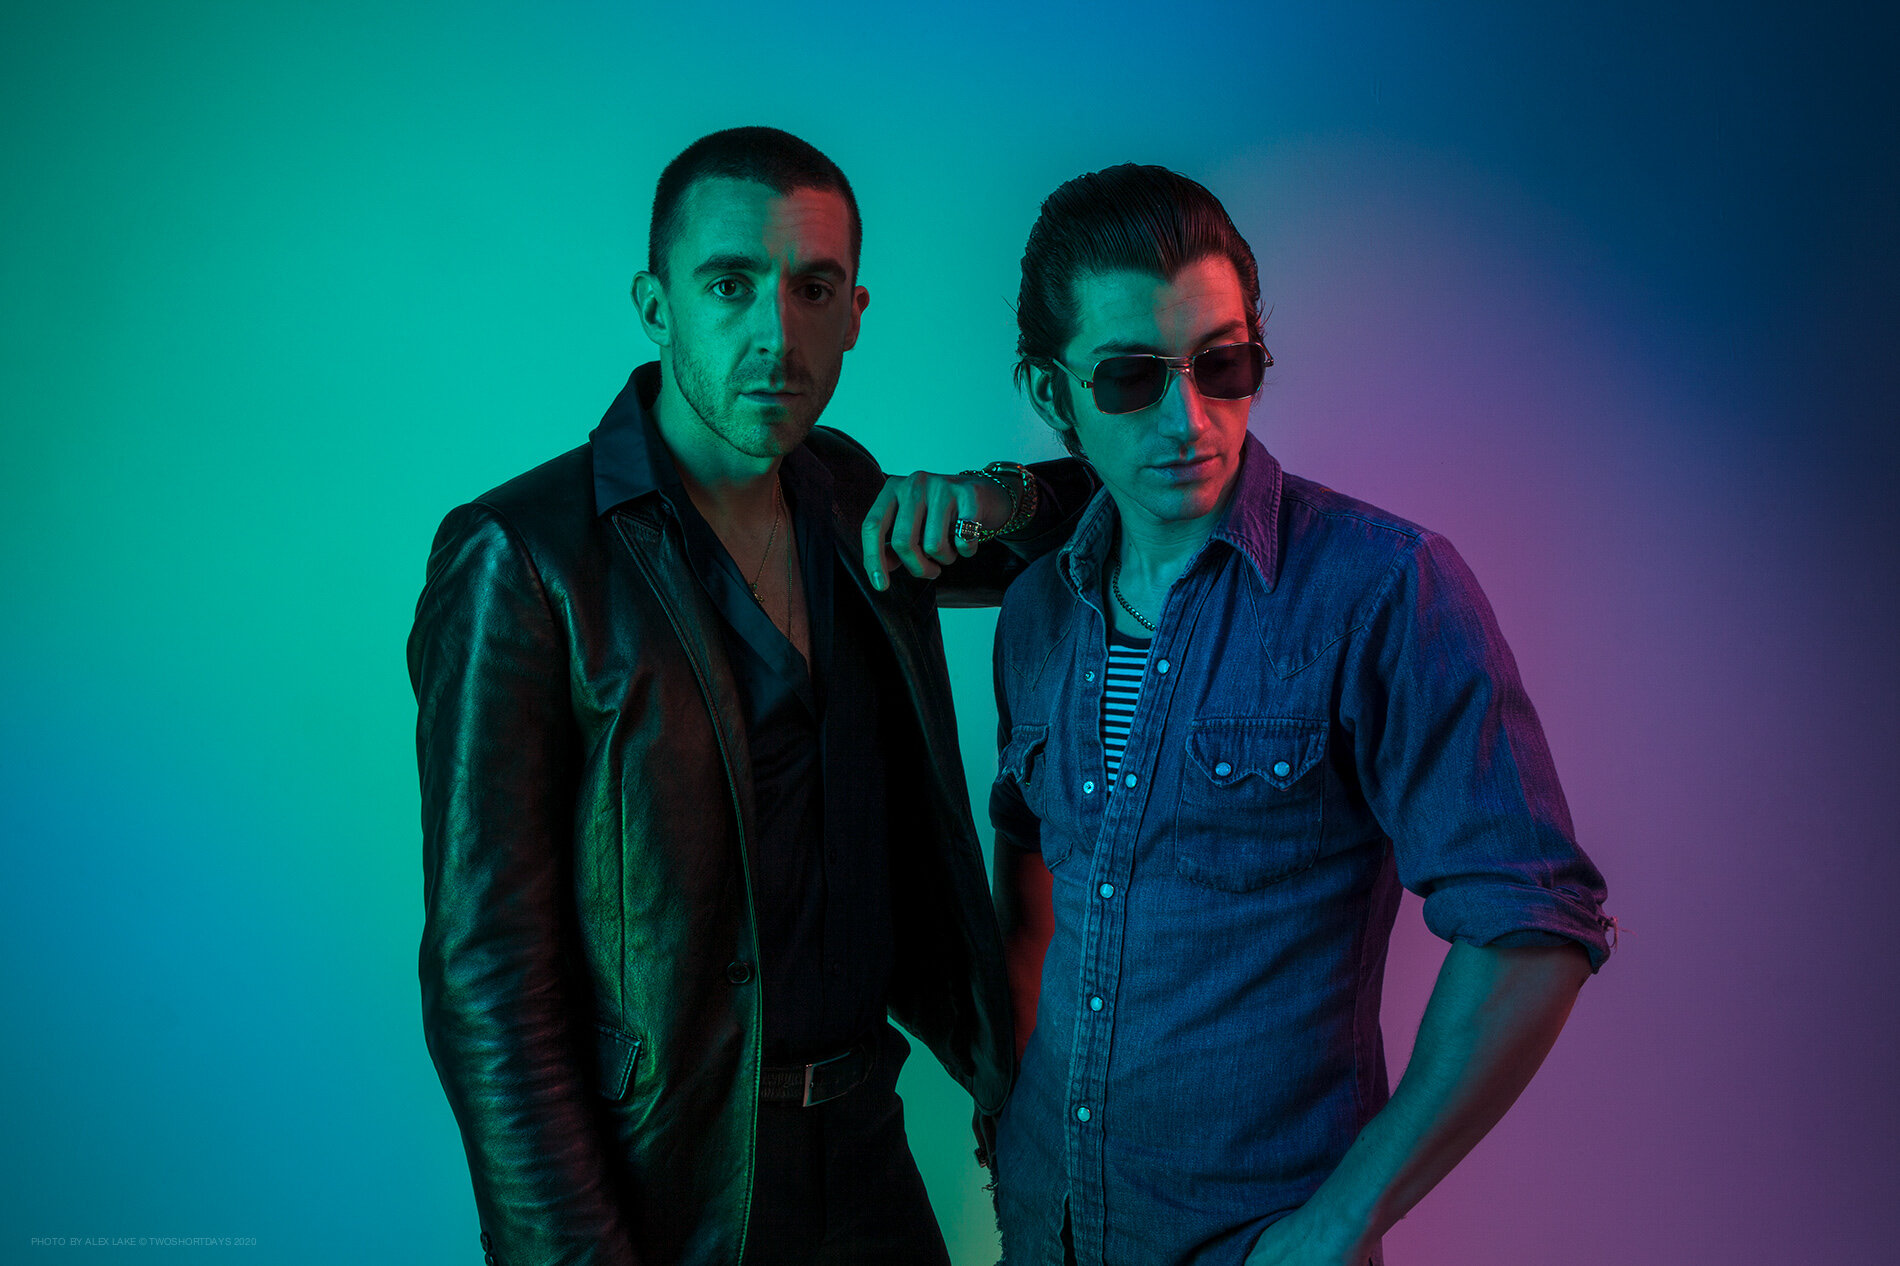 last_shadow_puppets_photography_copyright_ALEX_LAKE_do_not_reproduce_without_permission_TWOSHORTDAYS.jpg